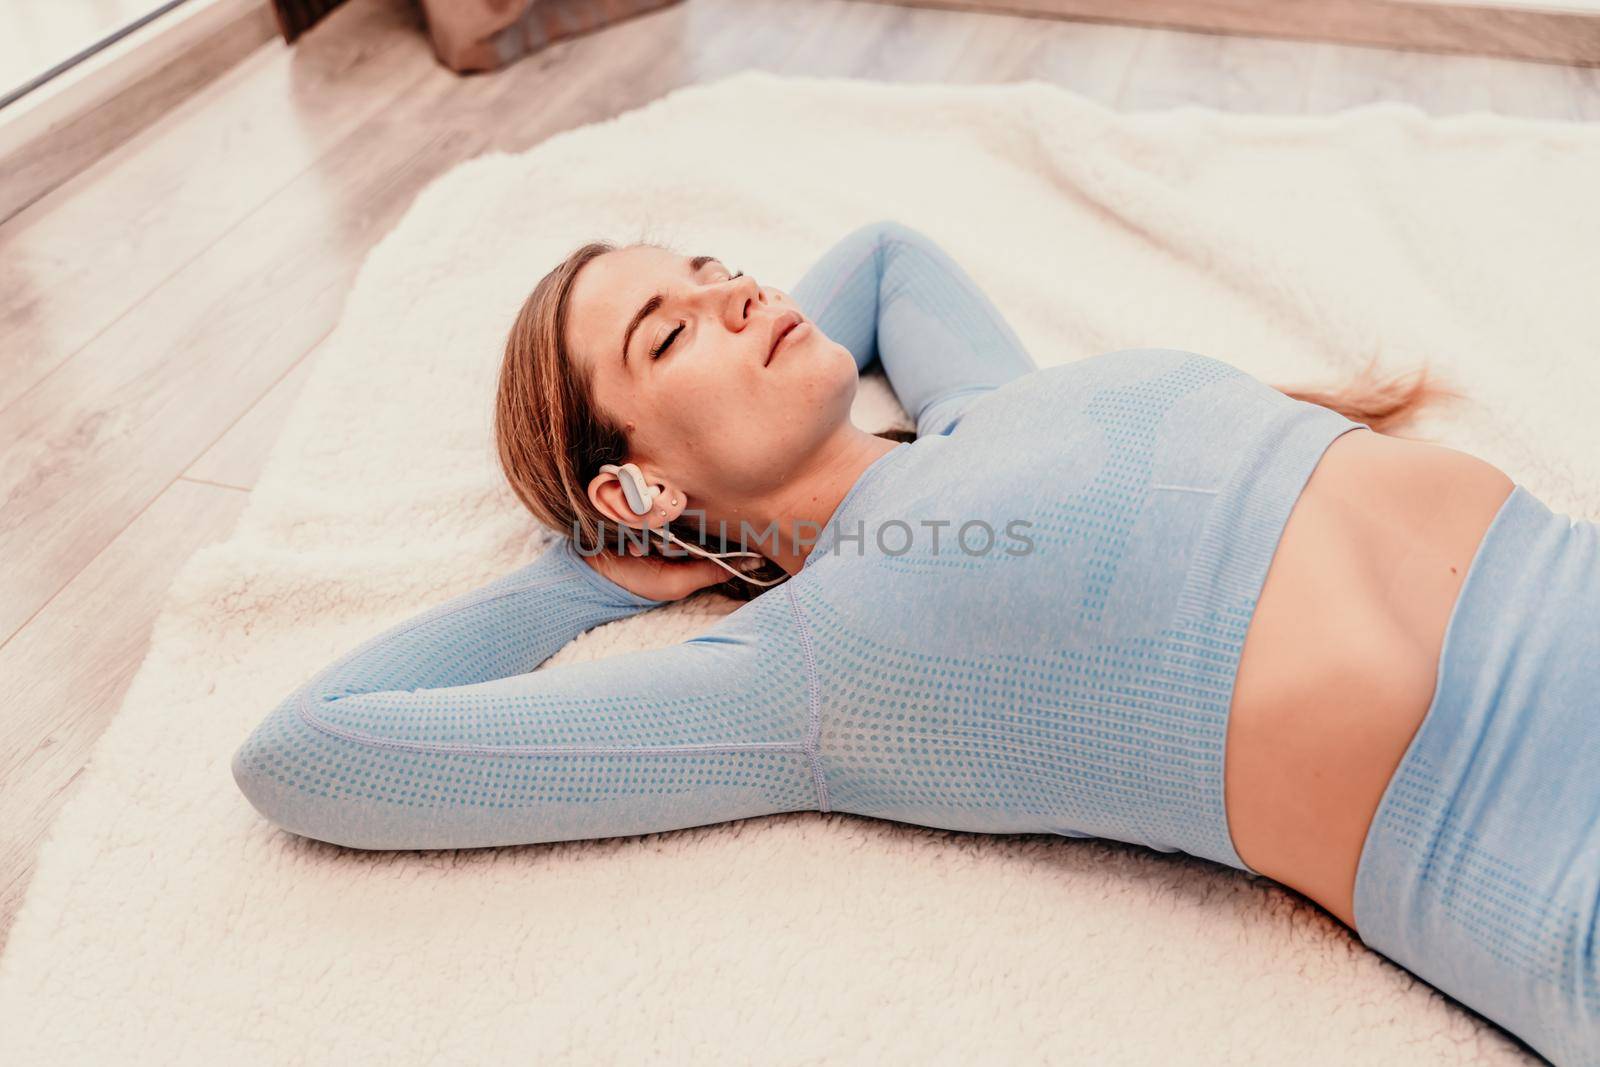 Top view portrait of relaxed woman listening to music with headphones lying on carpet at home. She is dressed in a blue tracksuit